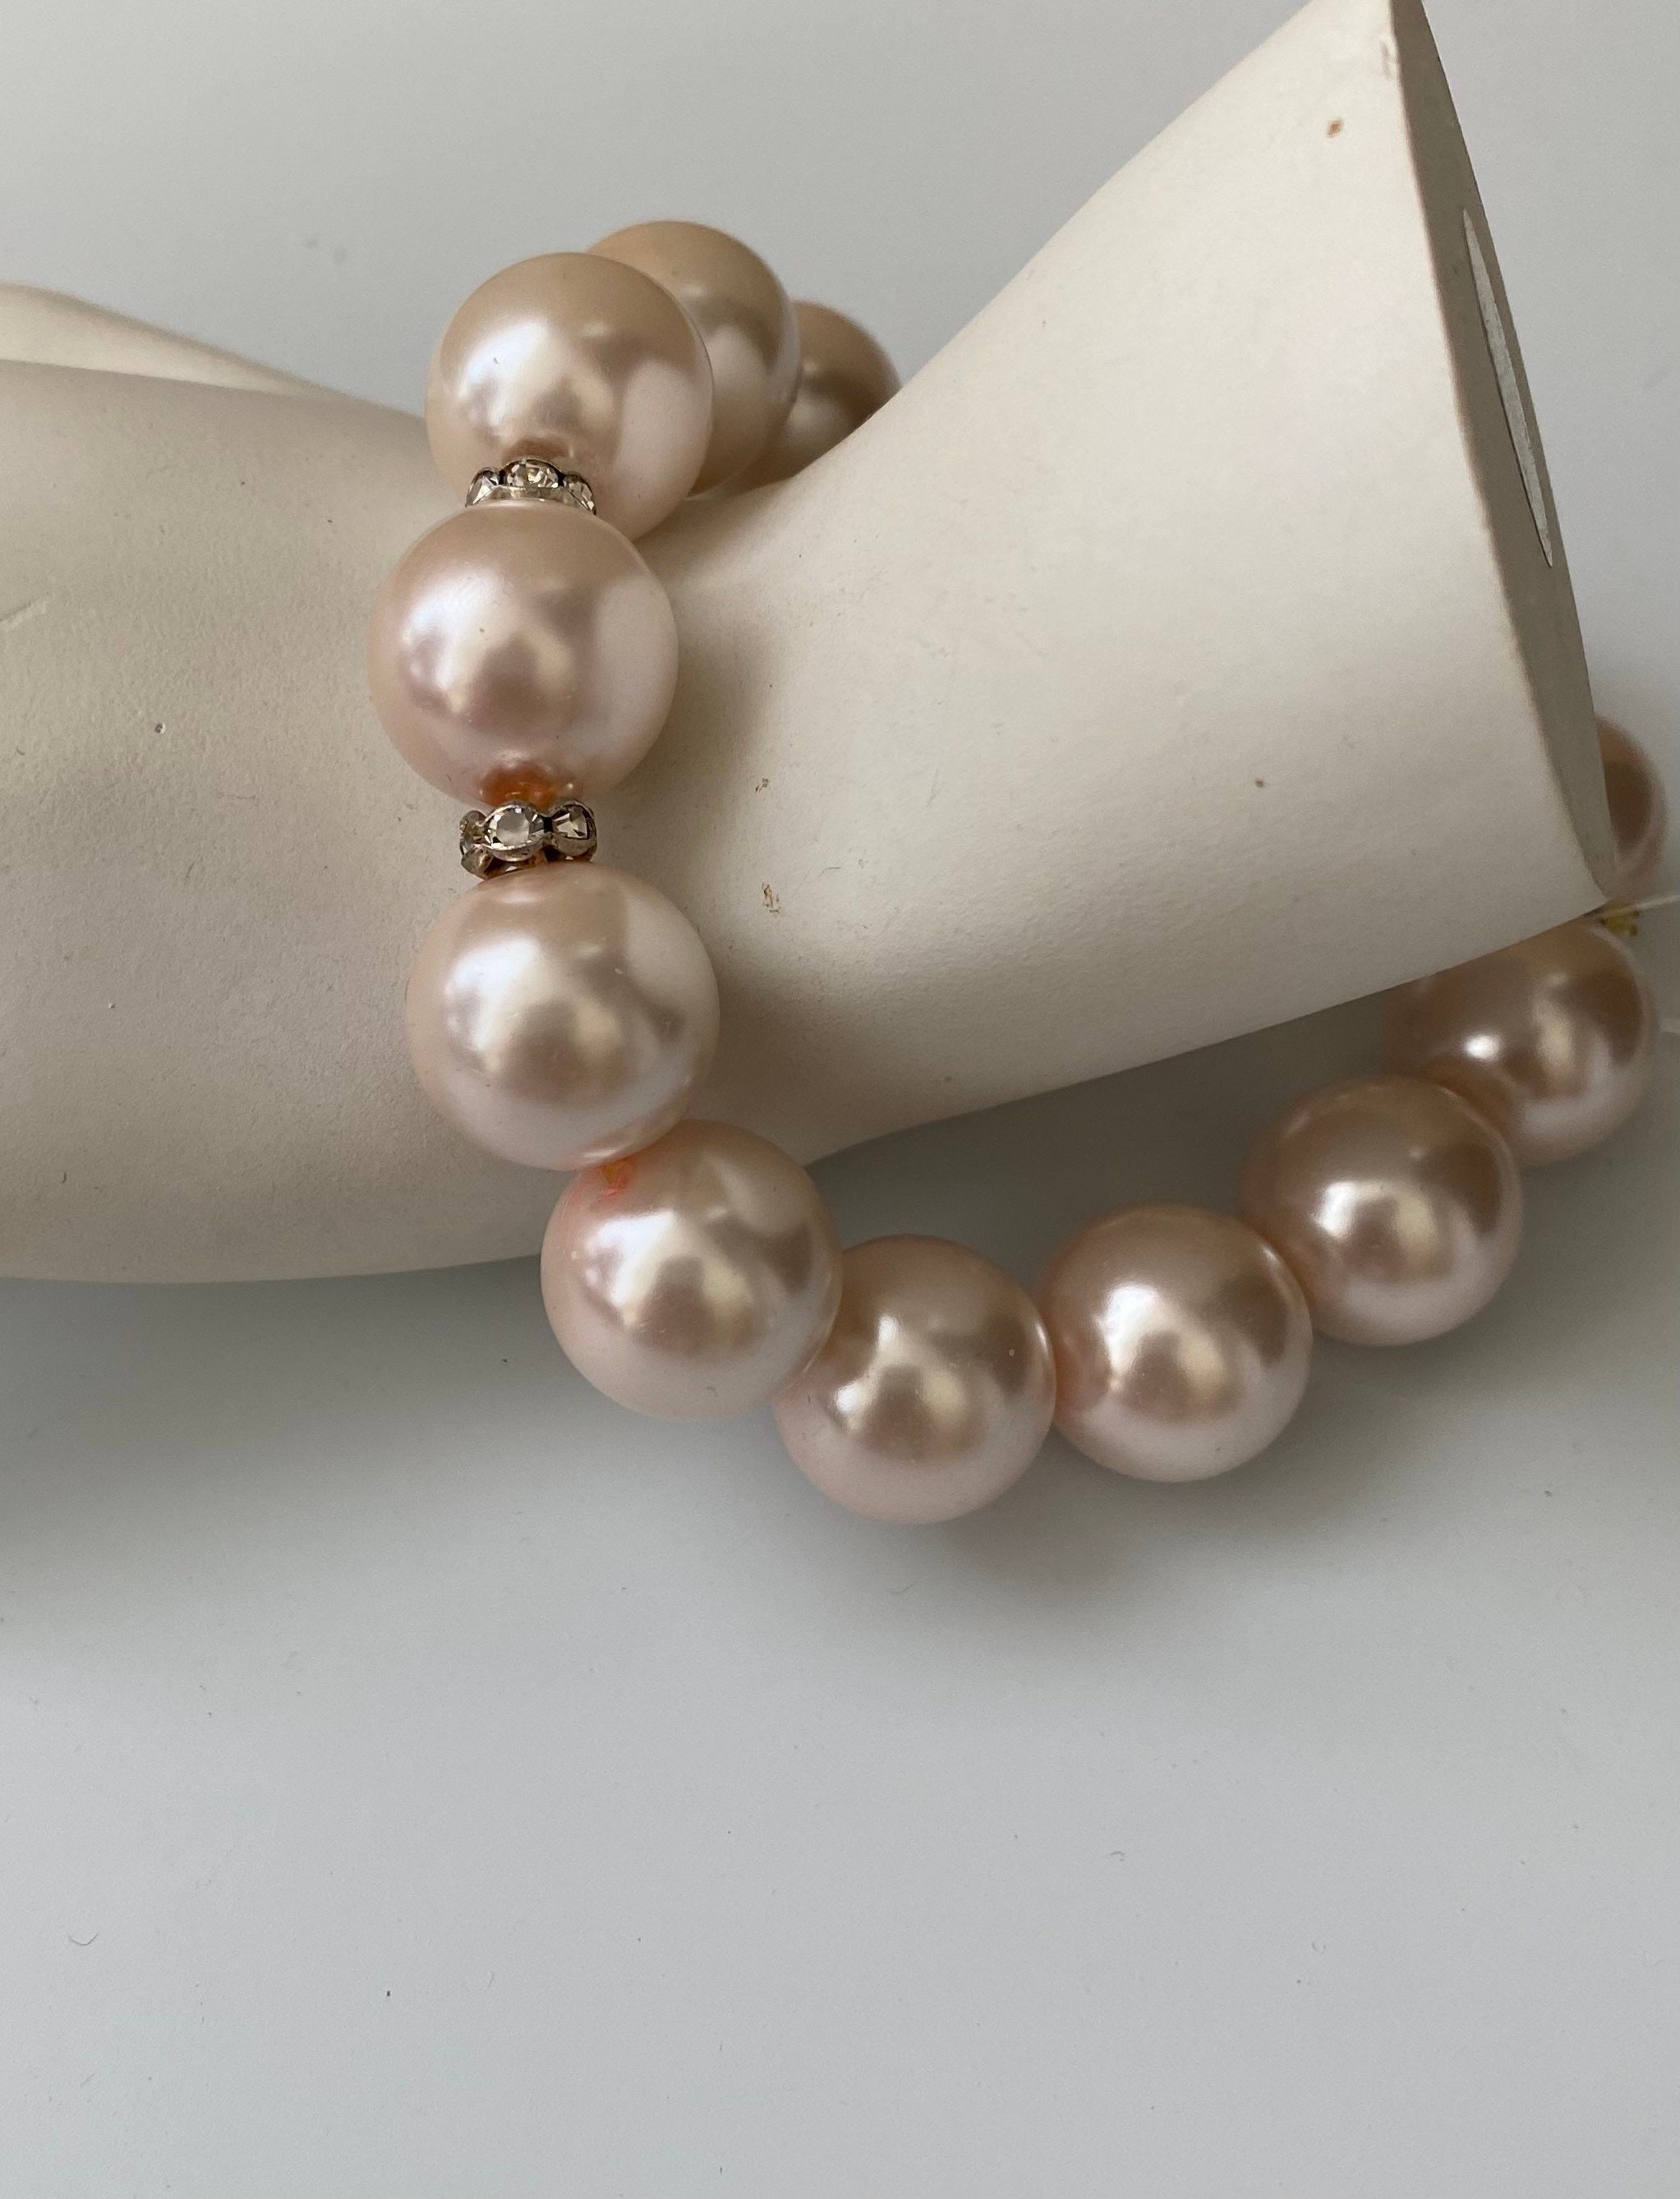 Buy 2-18mm Ivory Faux Pearls Round Smooth Ivory ABS Imitation Pearls Bulk  Pearls Wholesale Pearls Online in India - Etsy